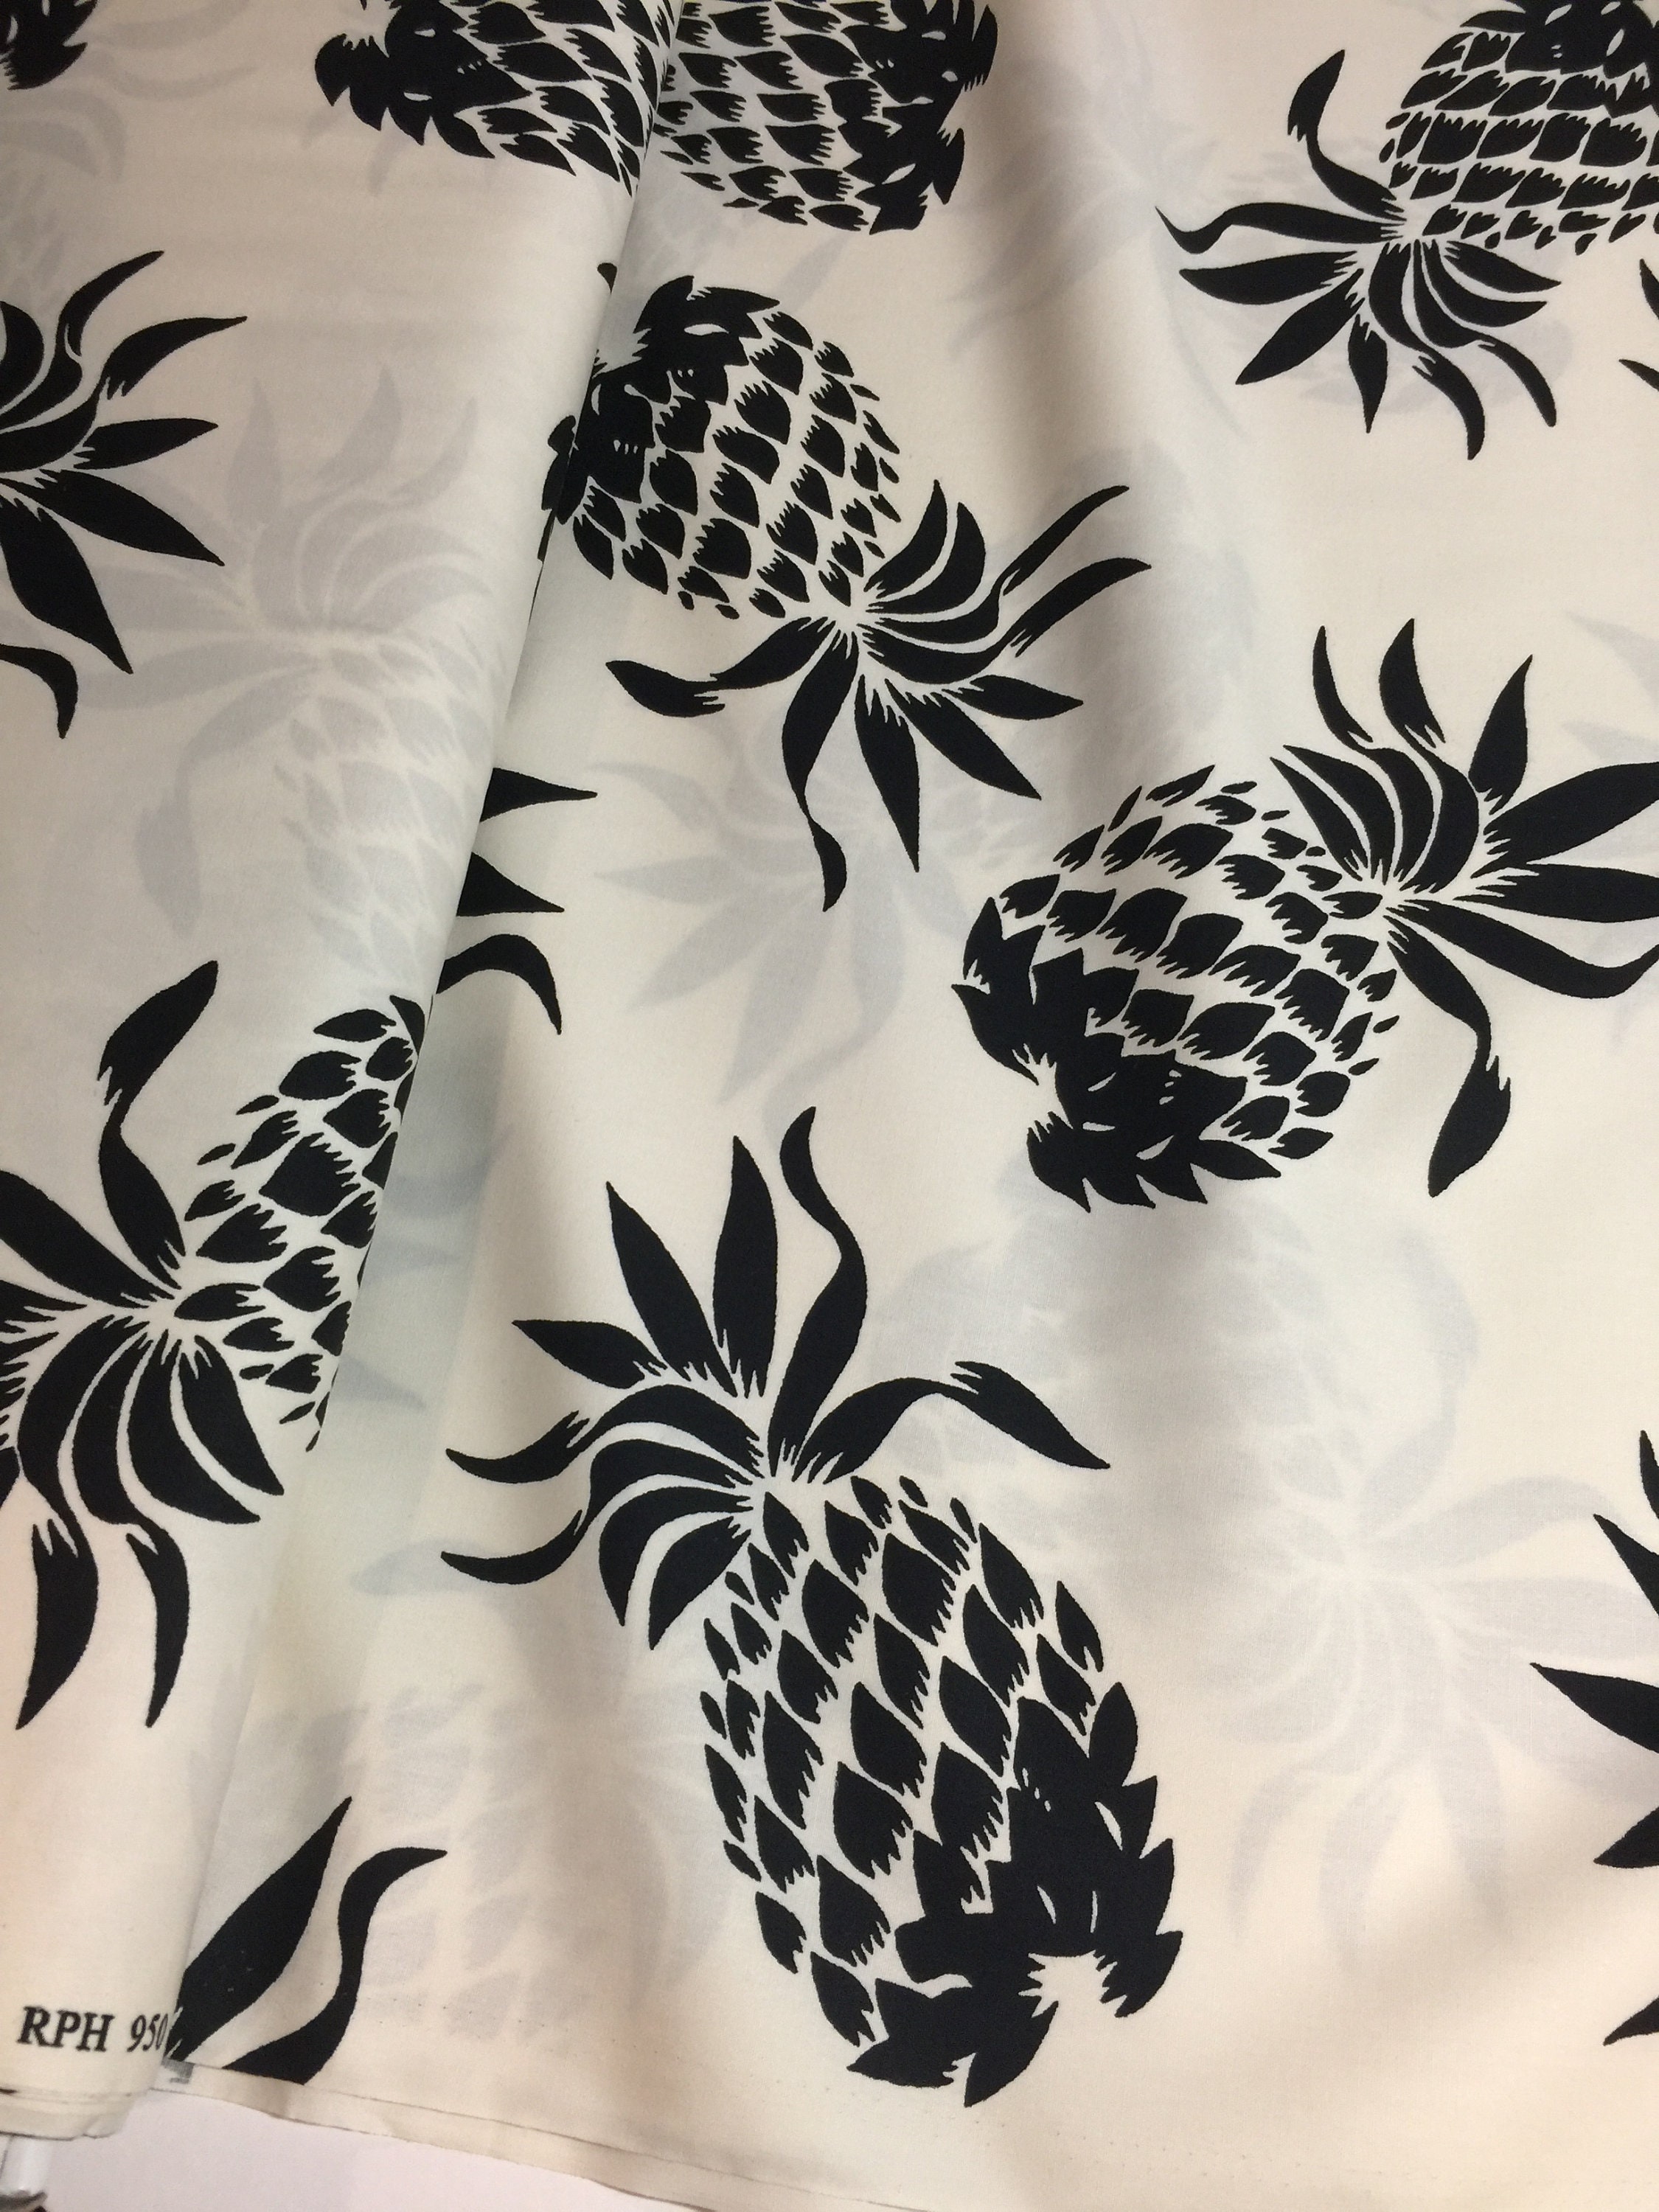 Pineapples Fabric Tropical Black on Cream White Fabric | Etsy